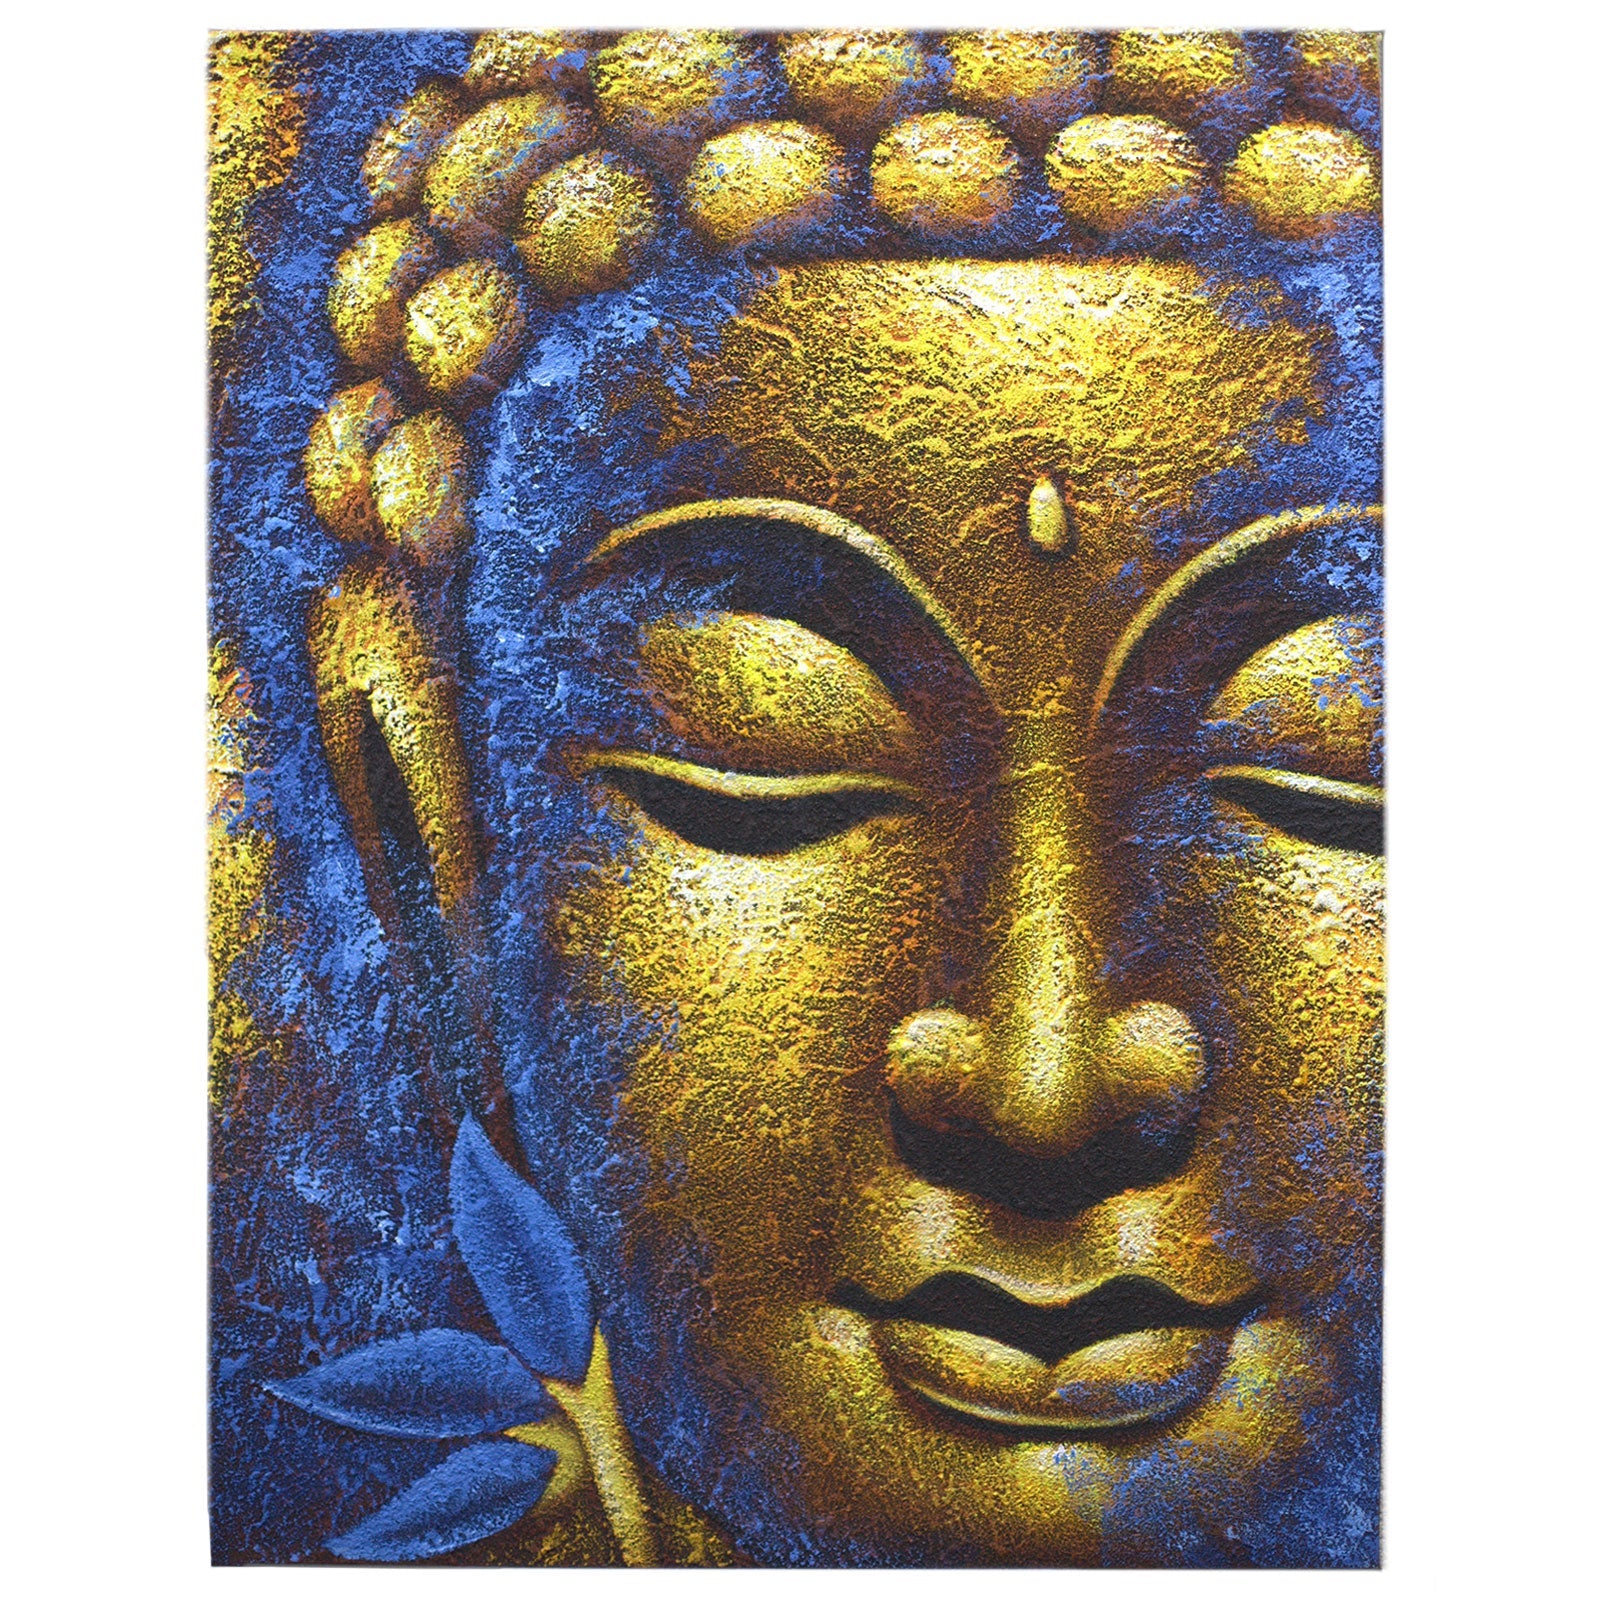 View Buddha Painting Gold Face Lotus Flower information